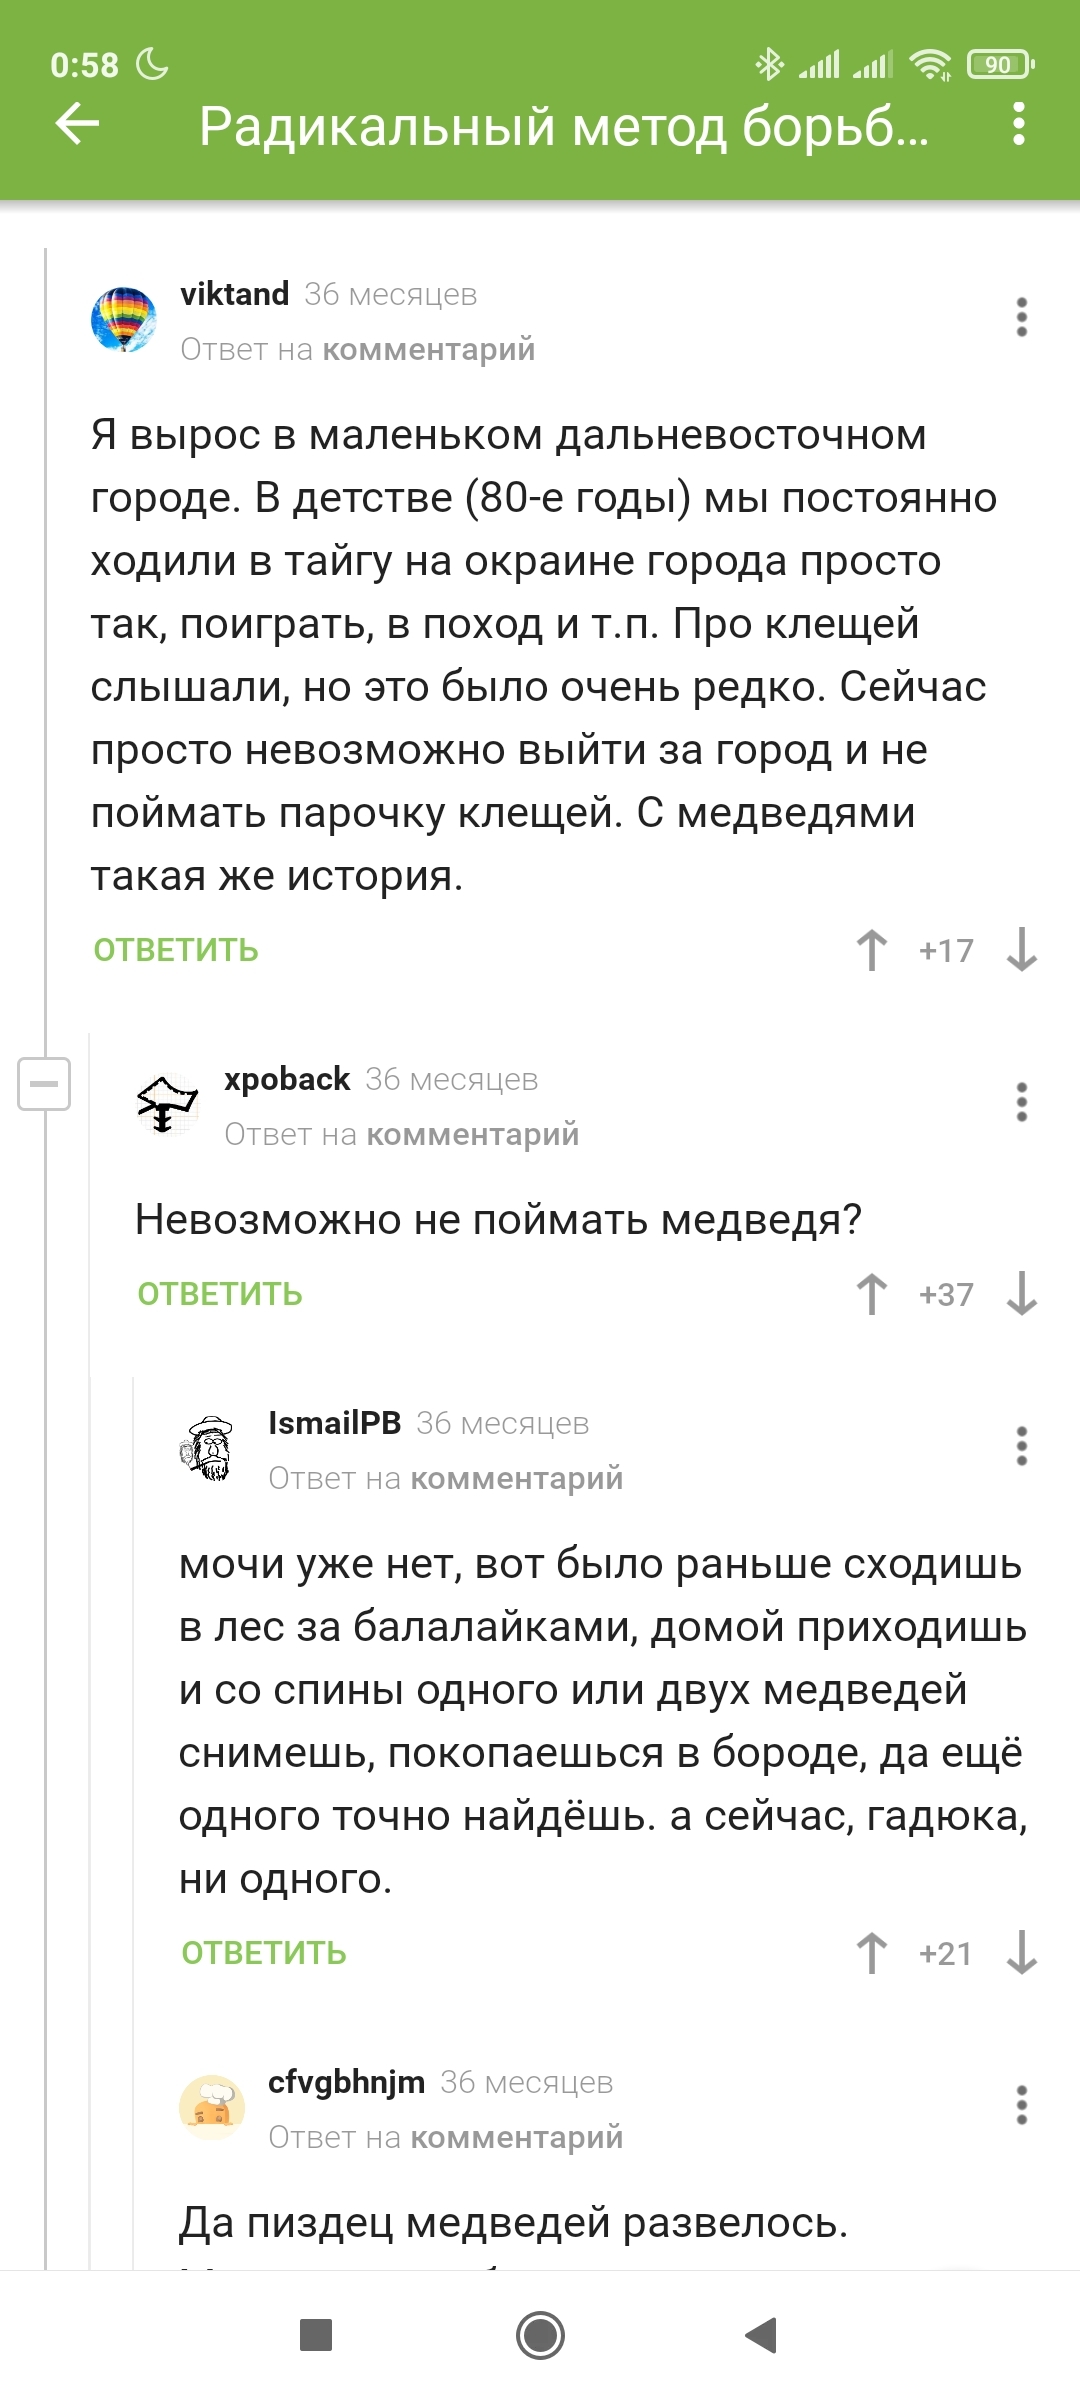 The usual thing - The Bears, Screenshot, Chatting in Internet, Russian spirit, Longpost, Comments on Peekaboo